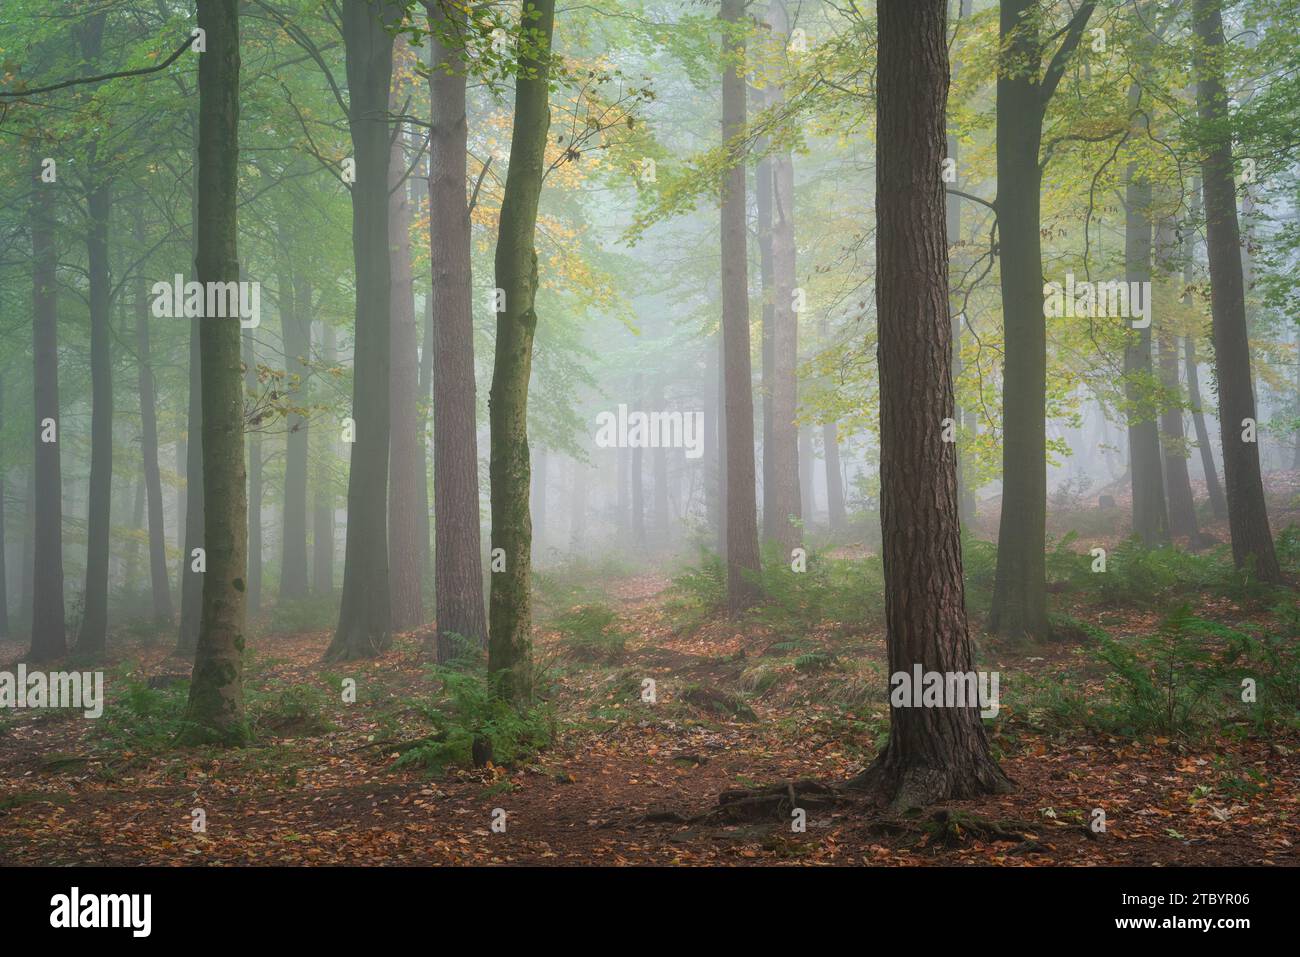 Thick fog in Chevin Forest Park simplifies the woodland environment with the last remnants of green foliage contrasting with the fallen autumn leaves. Stock Photo